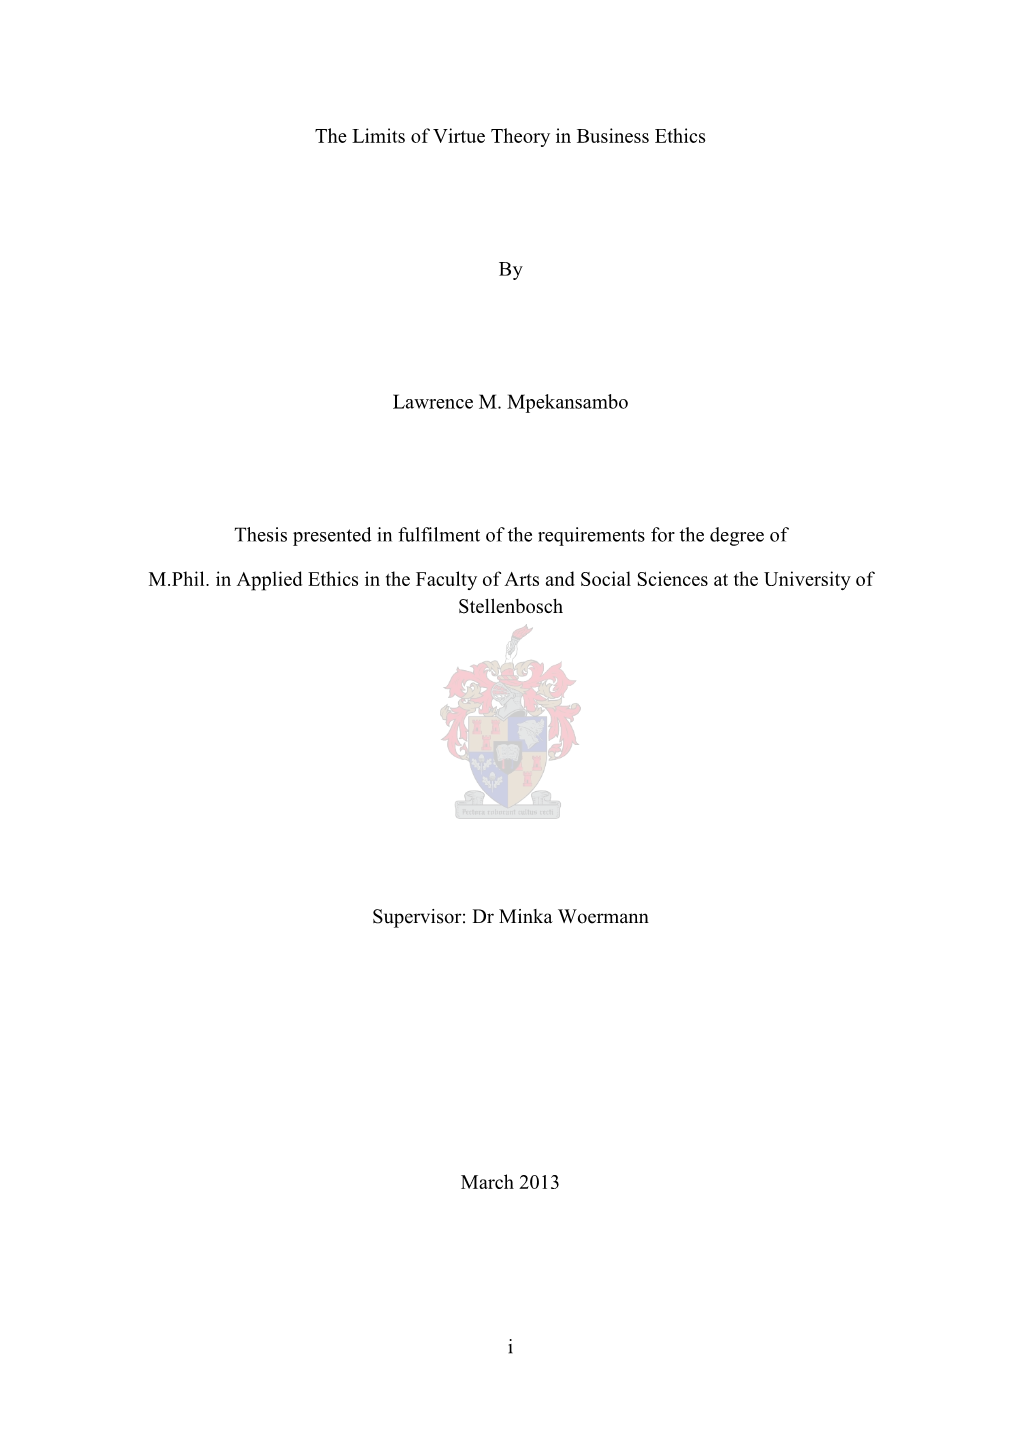 I the Limits of Virtue Theory in Business Ethics by Lawrence M. Mpekansambo Thesis Presented in Fulfilment of the Requirements F